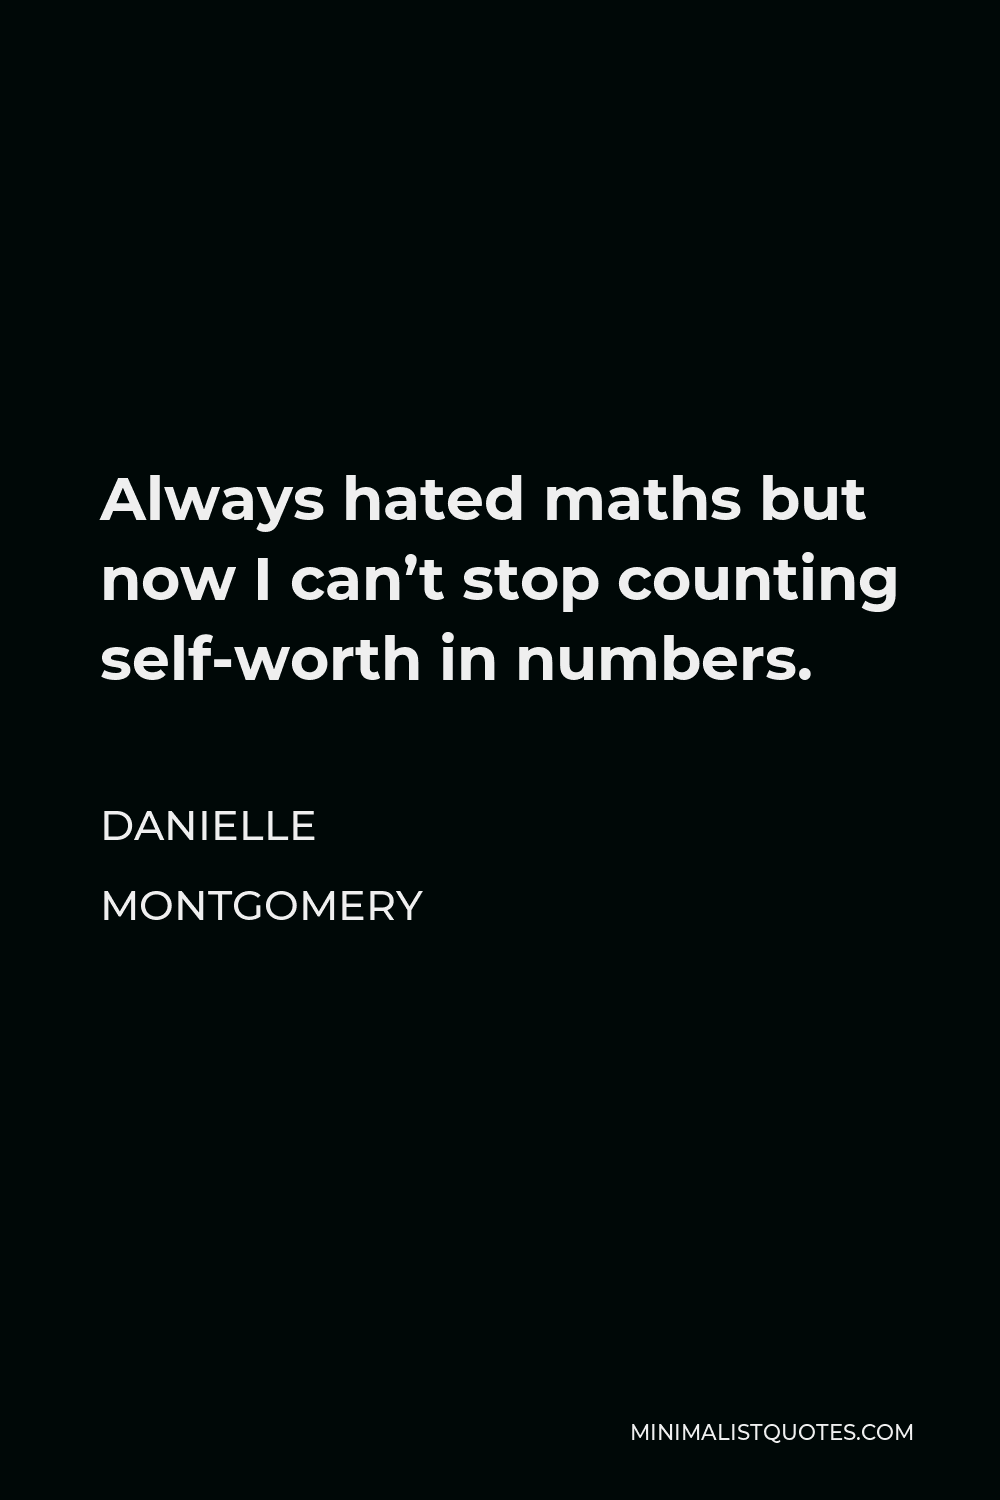 Danielle Montgomery Quote - Always hated maths but now I can’t stop counting self-worth in numbers.